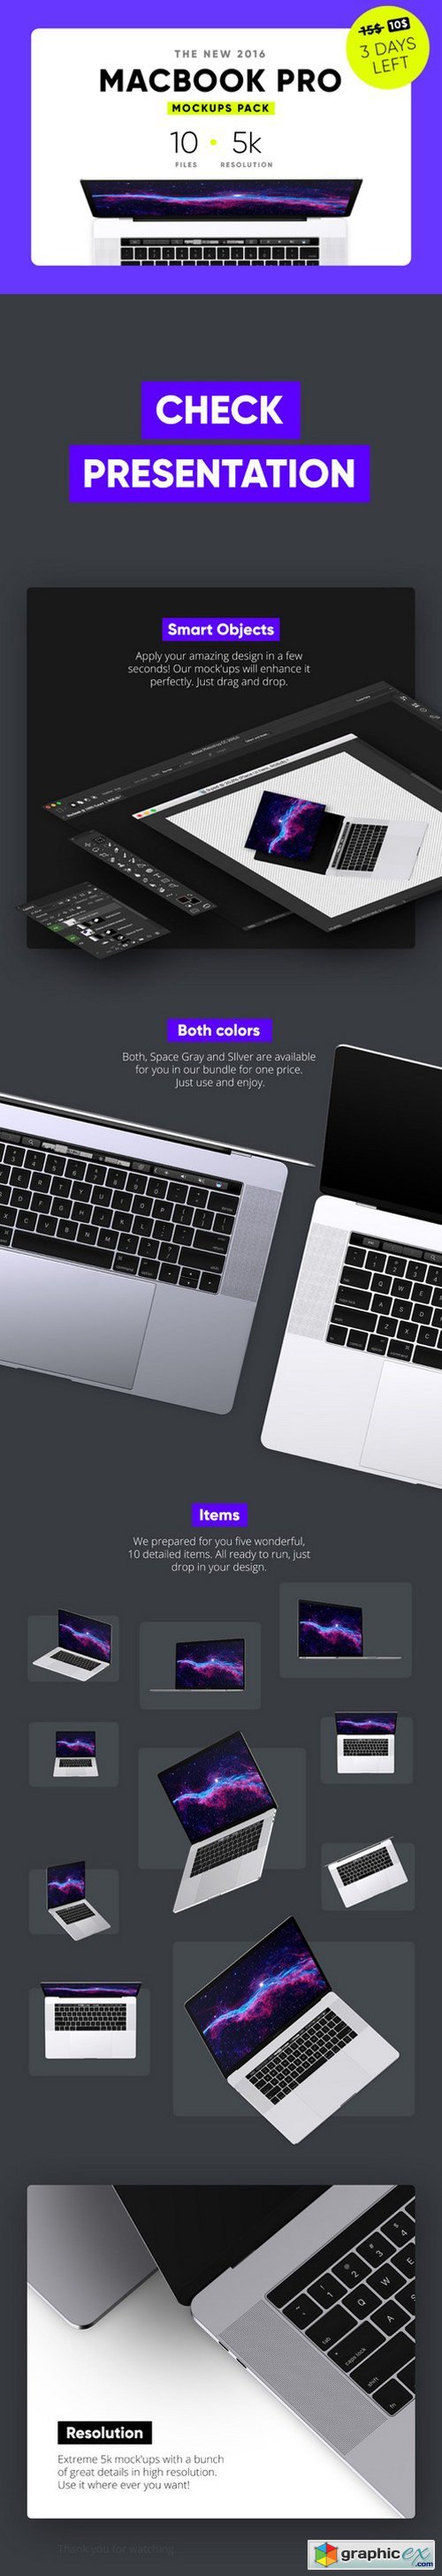 MacBook Pro 2016 with Touch Bar pack